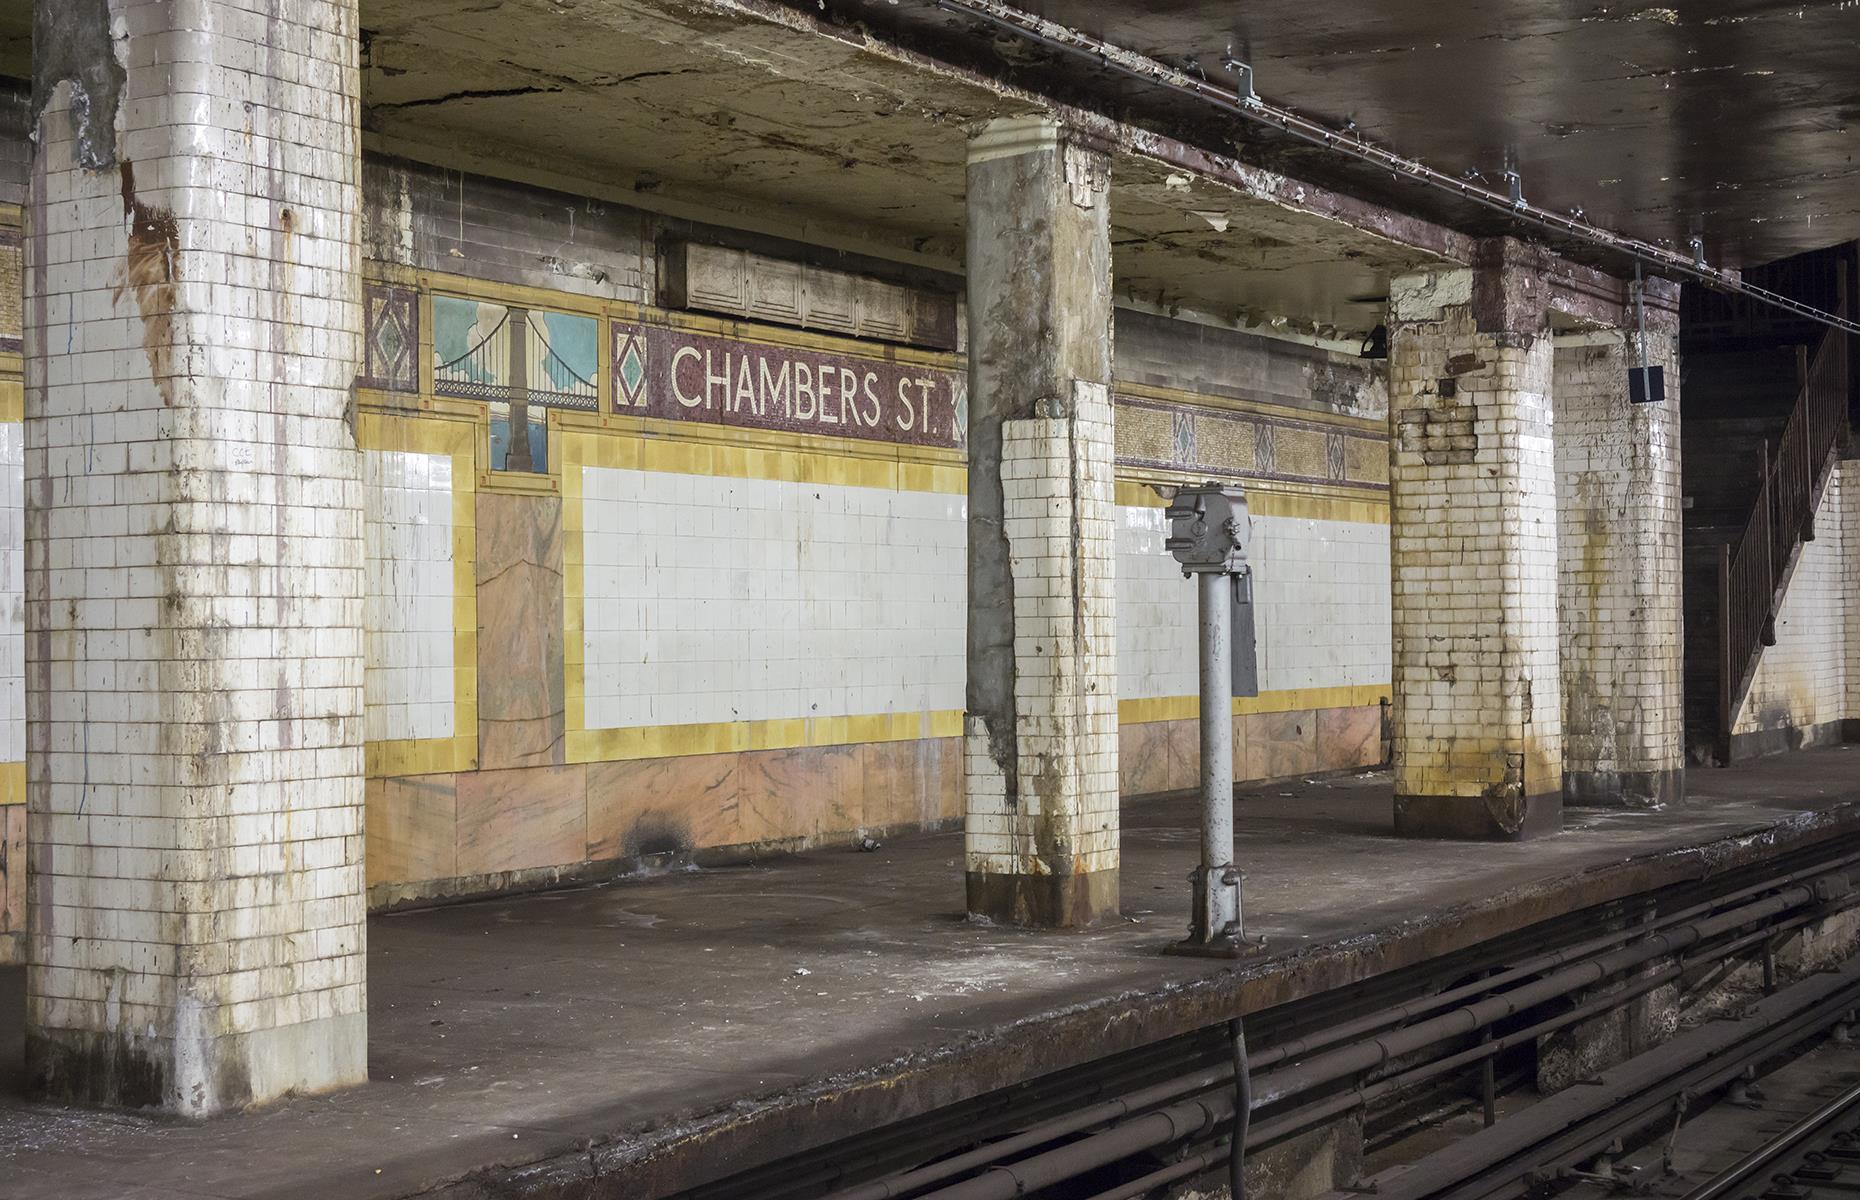 They Were Once Busy Subway and Underground Stations. Now They Lie Abandoned